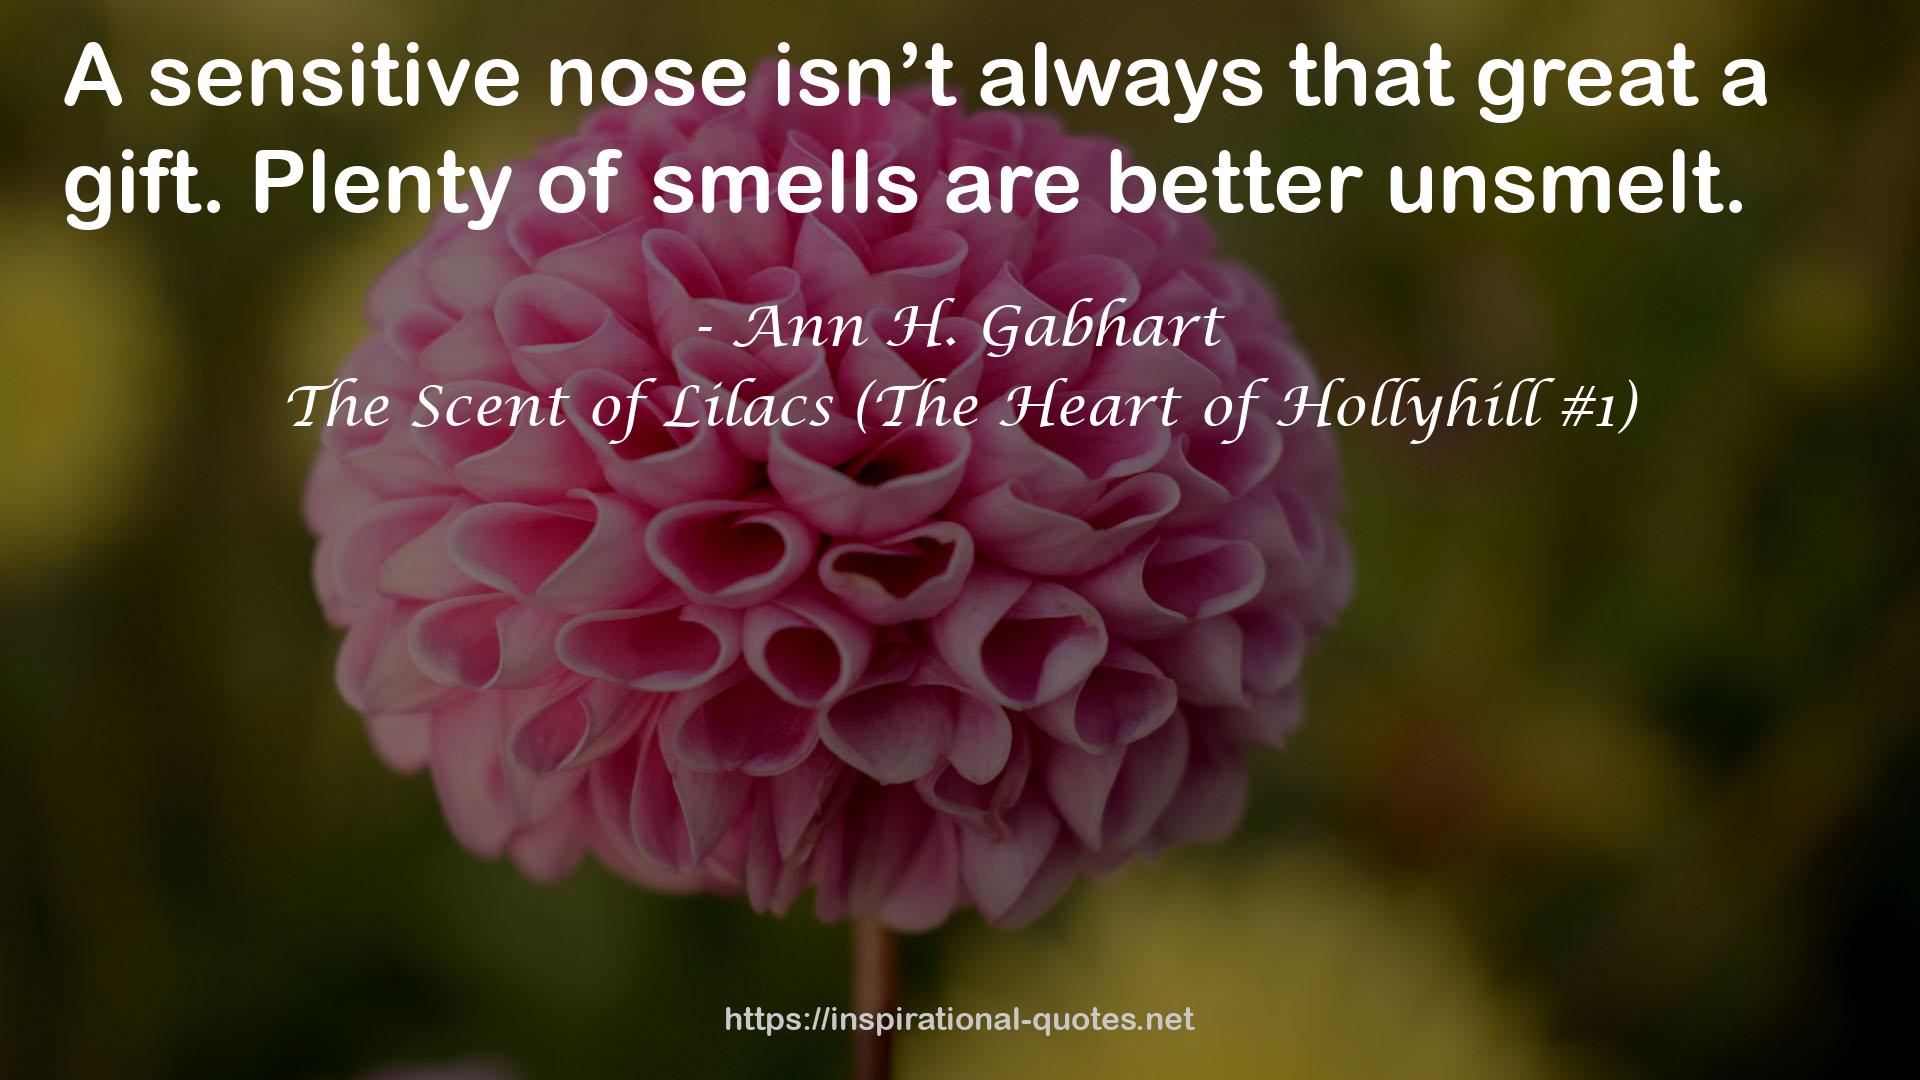 The Scent of Lilacs (The Heart of Hollyhill #1) QUOTES